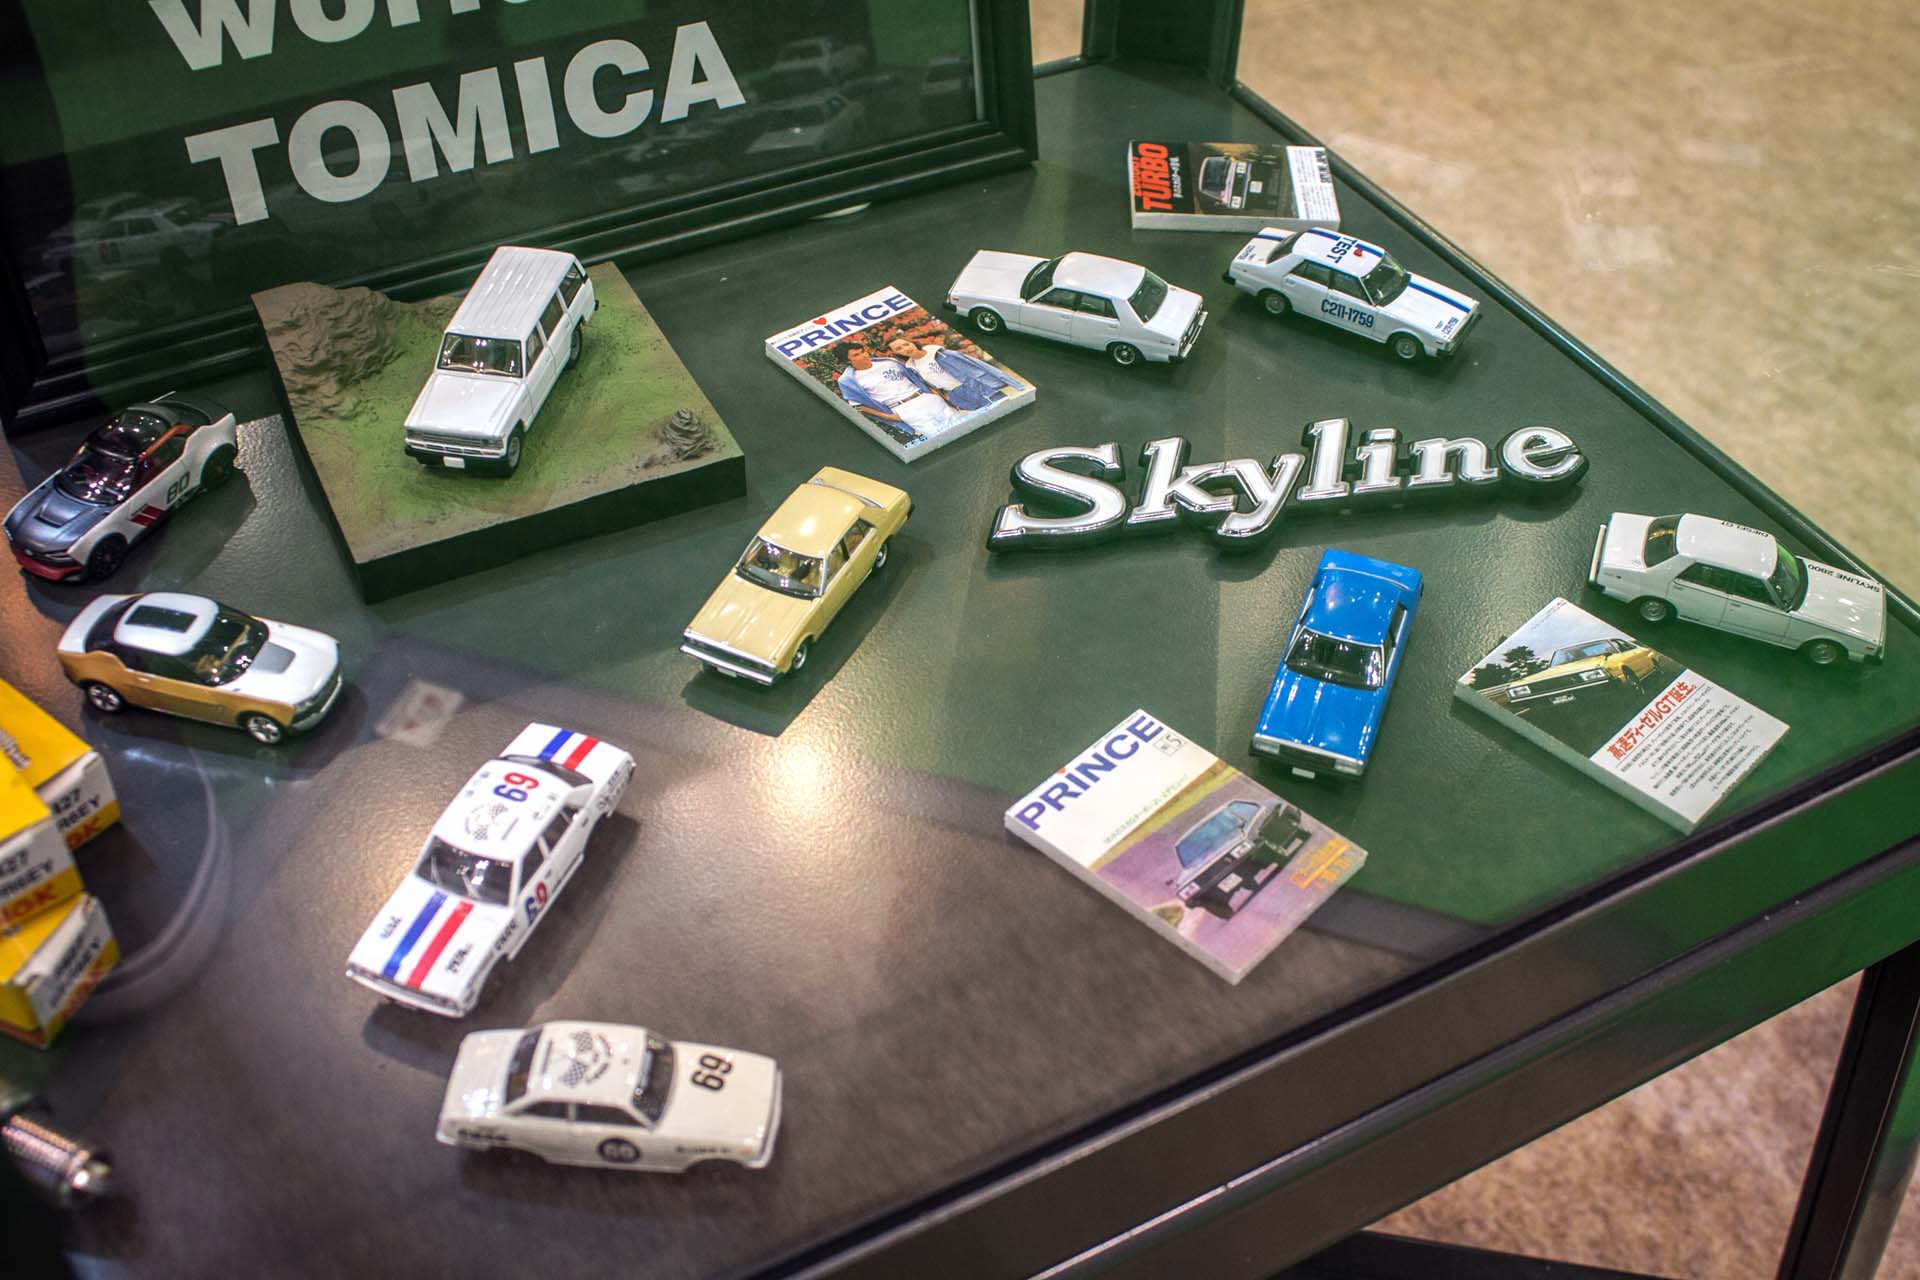 The initial run of Tomica 1/64th scale cars was all-Japanese: a Datsun Bluebird SSS, a Datsun Fairlady Z432, two Toyota Crowns, a Toyota Corona, and a Toyota 2000GT. Today, Tomica still offers classic Japanese machinery from the 1970s with their Limited Vintage line.